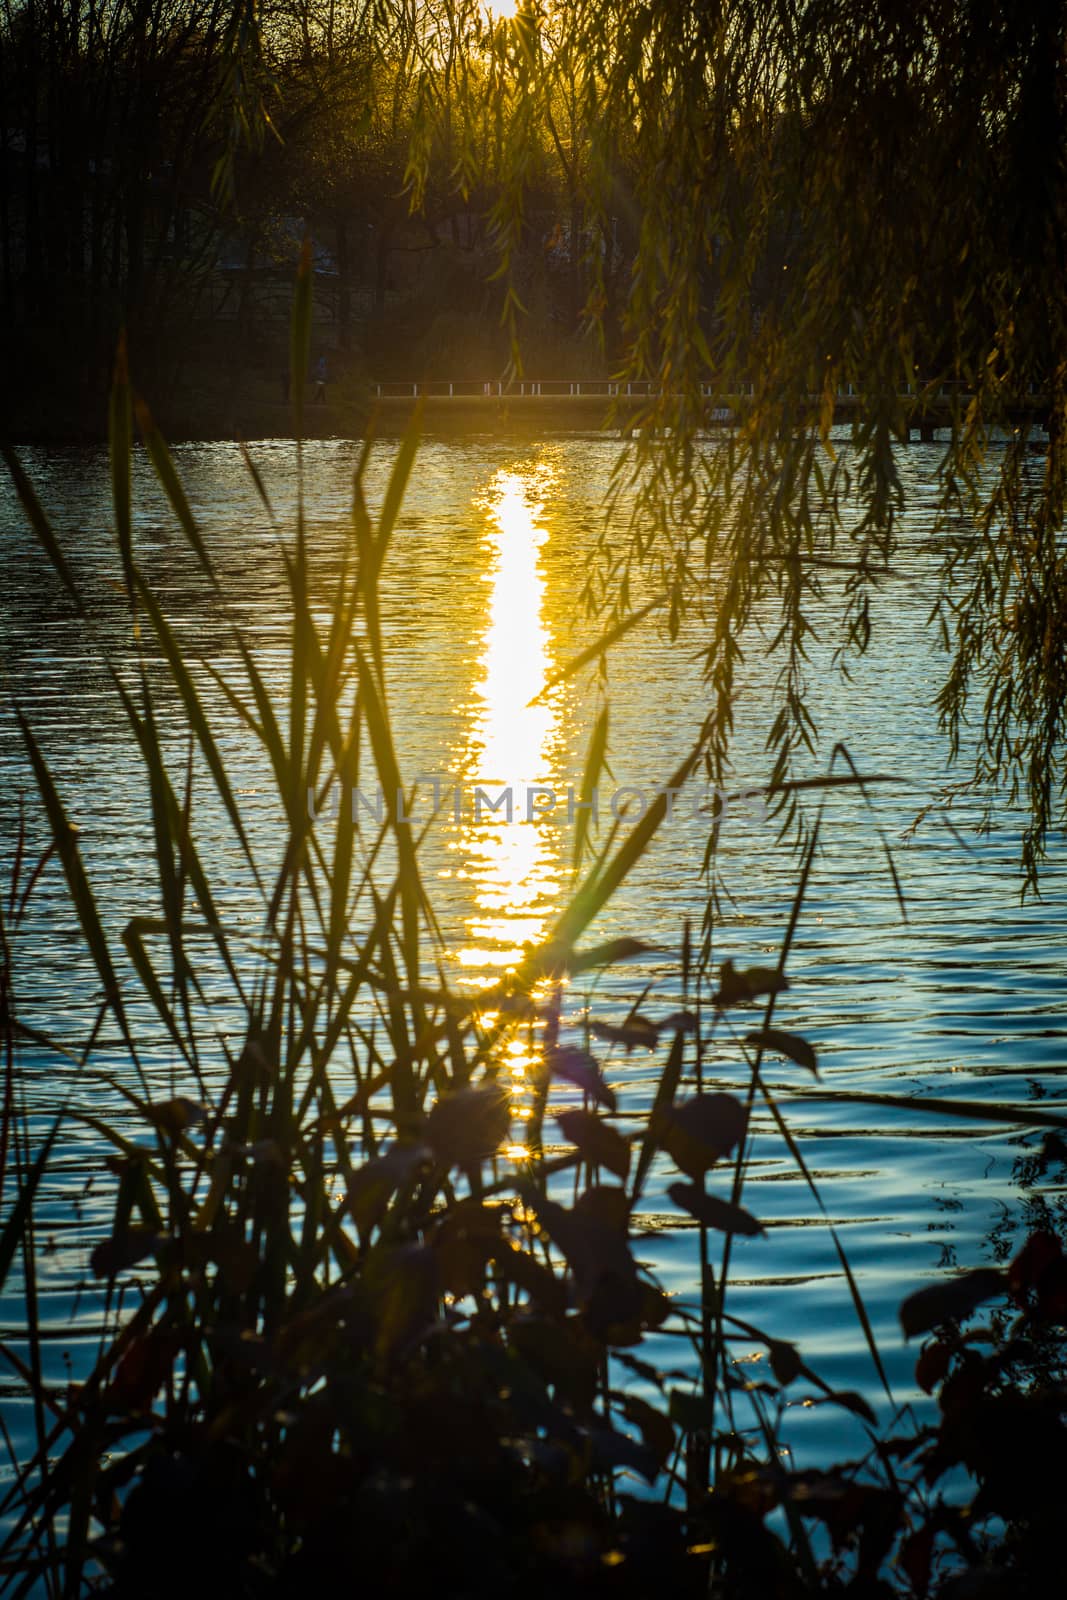 The golden evening sun shines on the water of the lake, reeds and willow